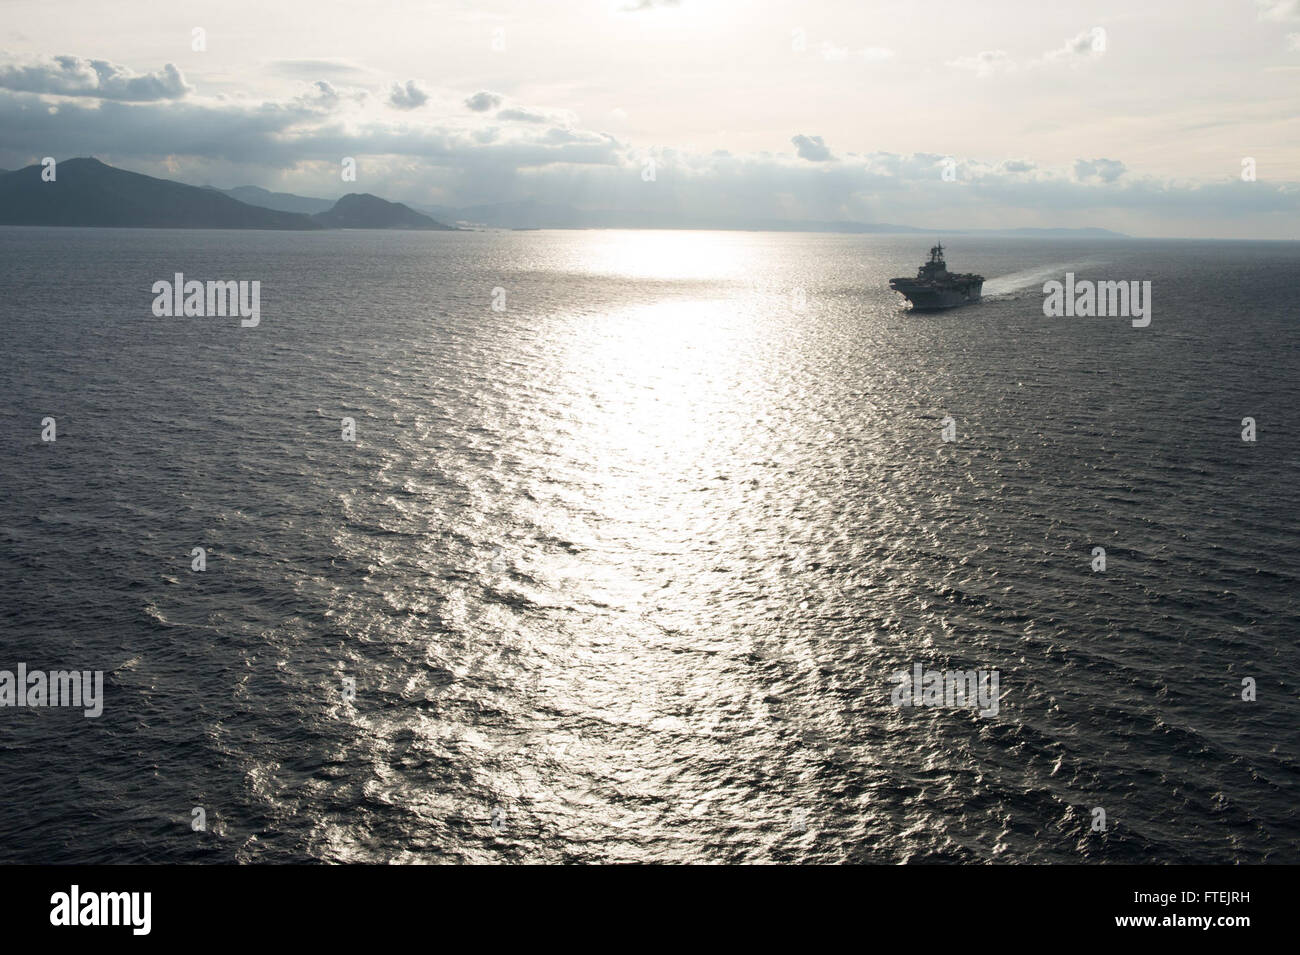 STRAIT OF GIBRALTAR (Dec. 27, 2014) Amphibious assault ship USS Iwo Jima (LHD 7) conducts an eastbound transit of the Strait of Gibraltar Dec. 27, 2014. Iwo Jima, deployed as part of the Iwo Jima Amphibious Ready Group/24th Marine Expeditionary Unit (IWO ARG/24 MEU), is conducting naval operations in the U.S. 6th Fleet area of operations in support of U.S. national security interests in Europe. Stock Photo